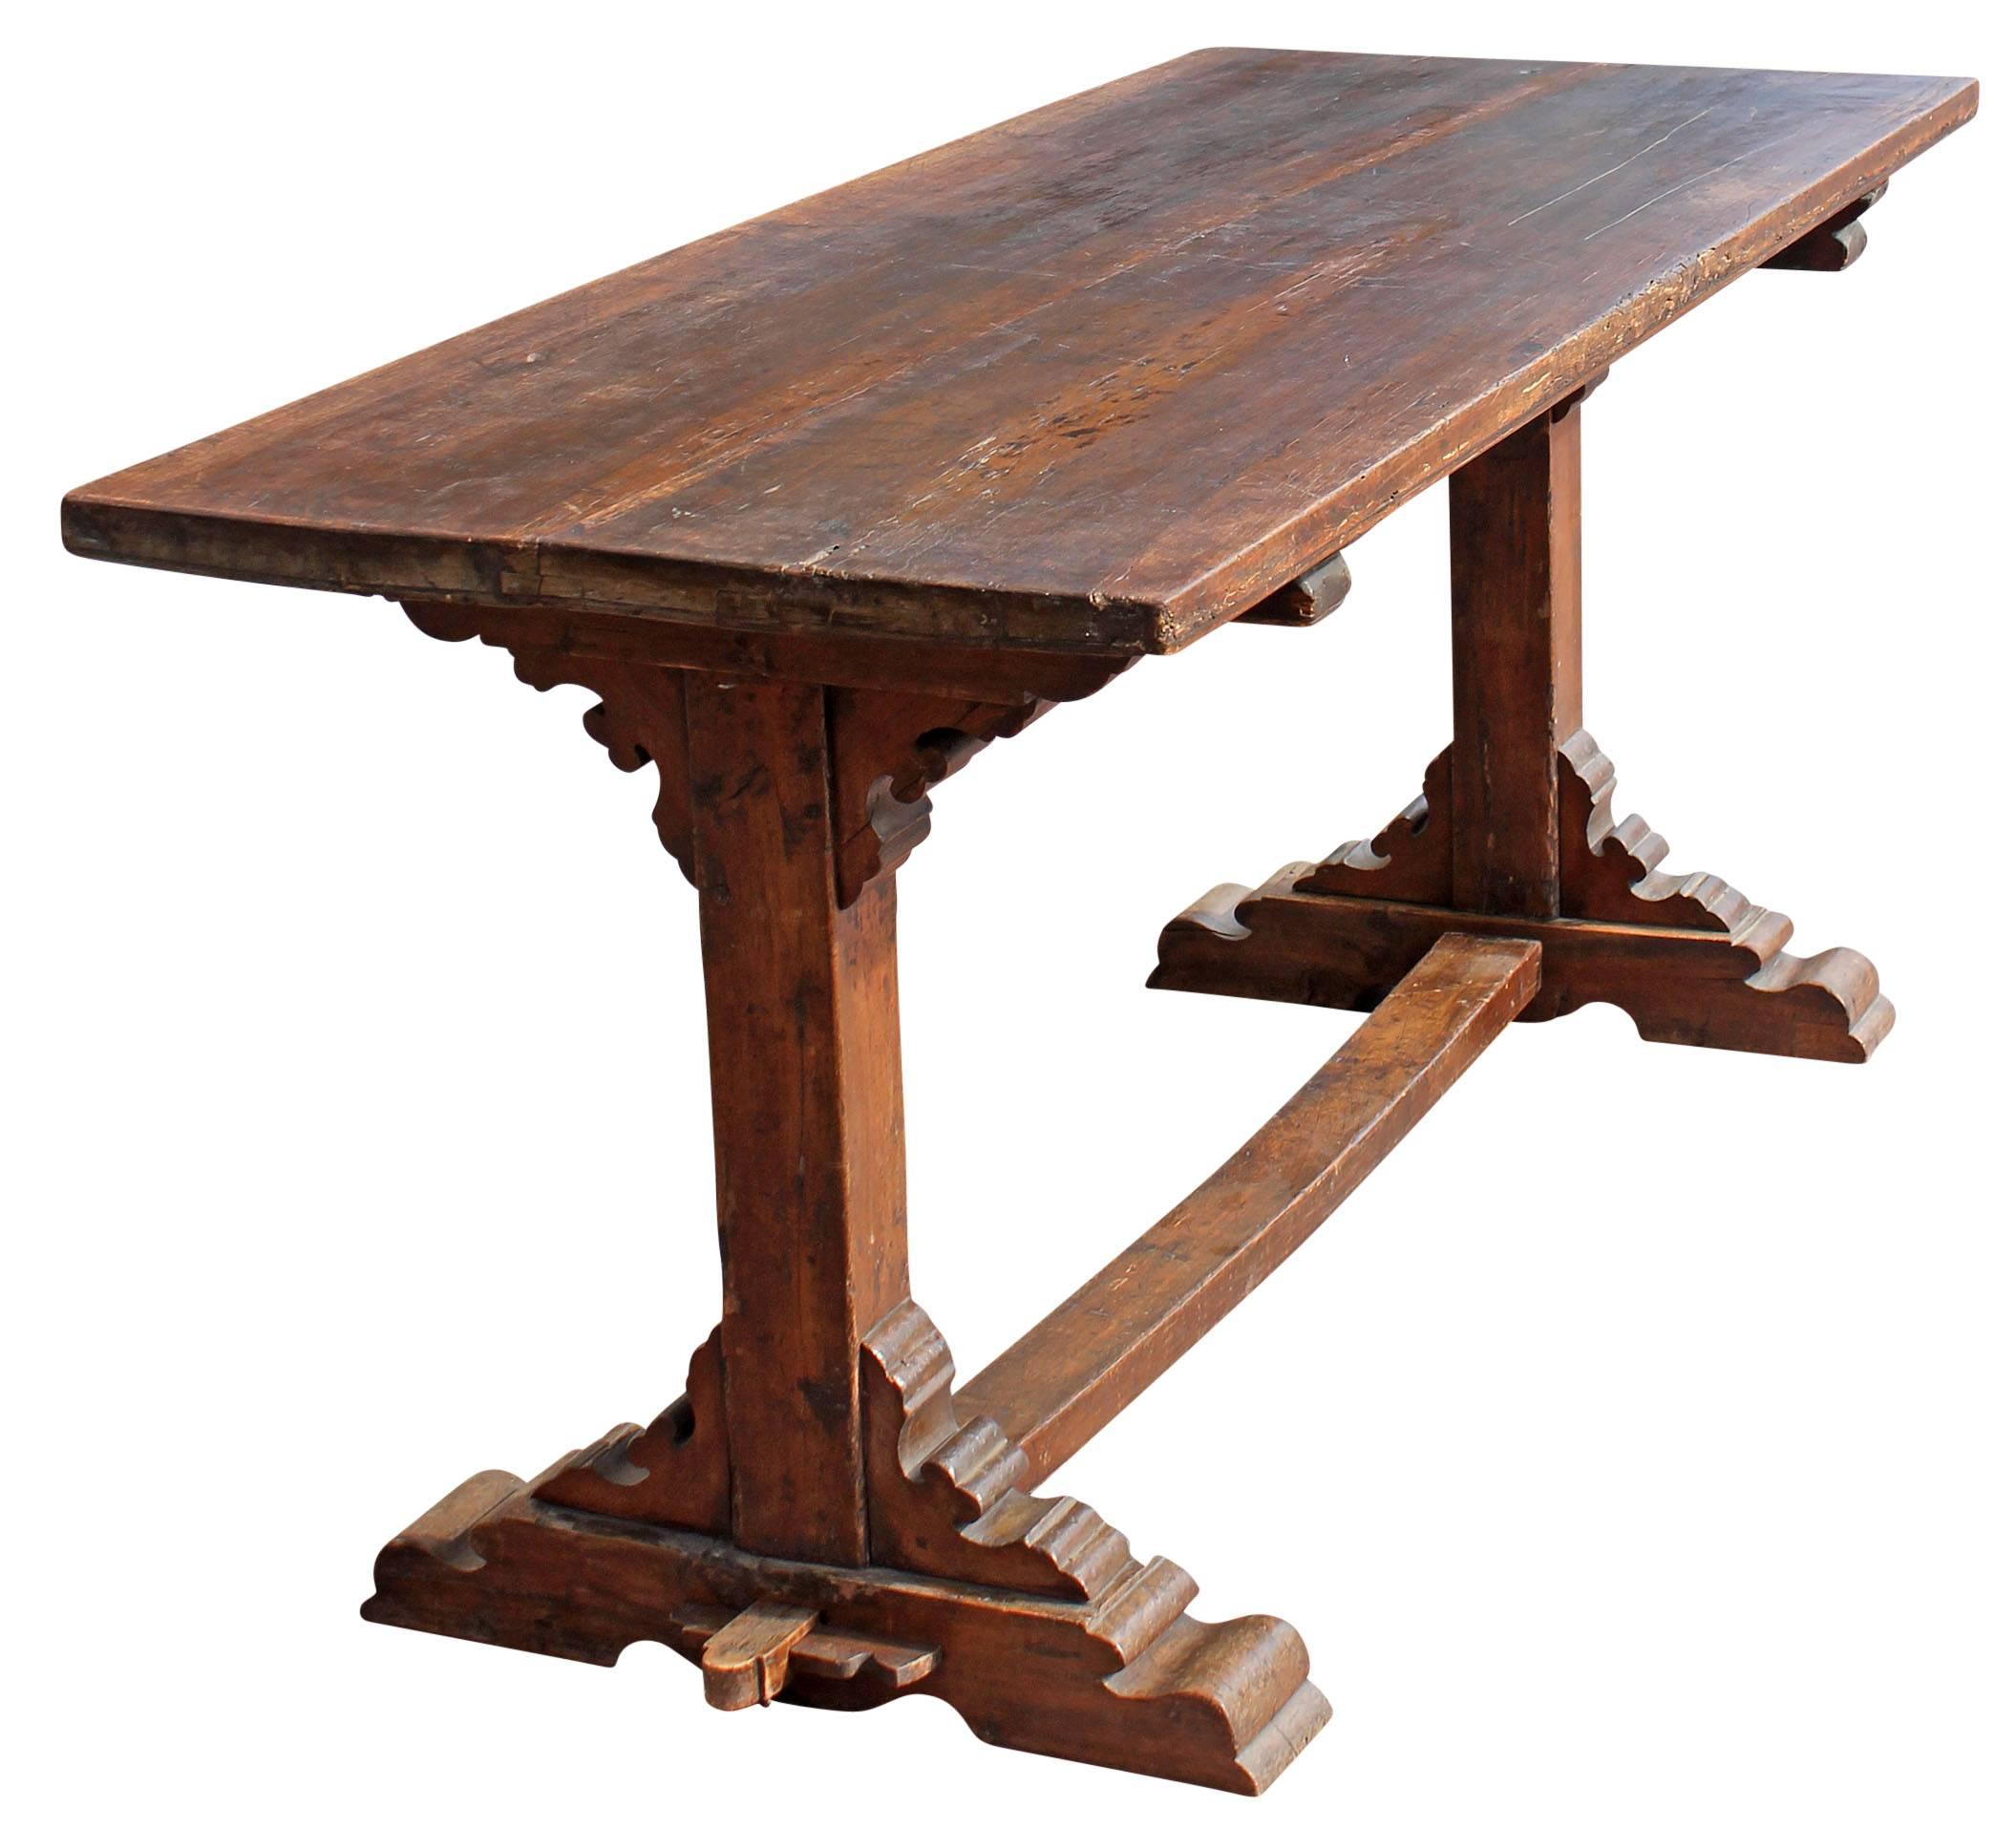  Italian Baroque 18th Century trestle library or work table. Solid walnut. Original warm patina. Mortise and tenon construction. Table disassembles into four pieces.